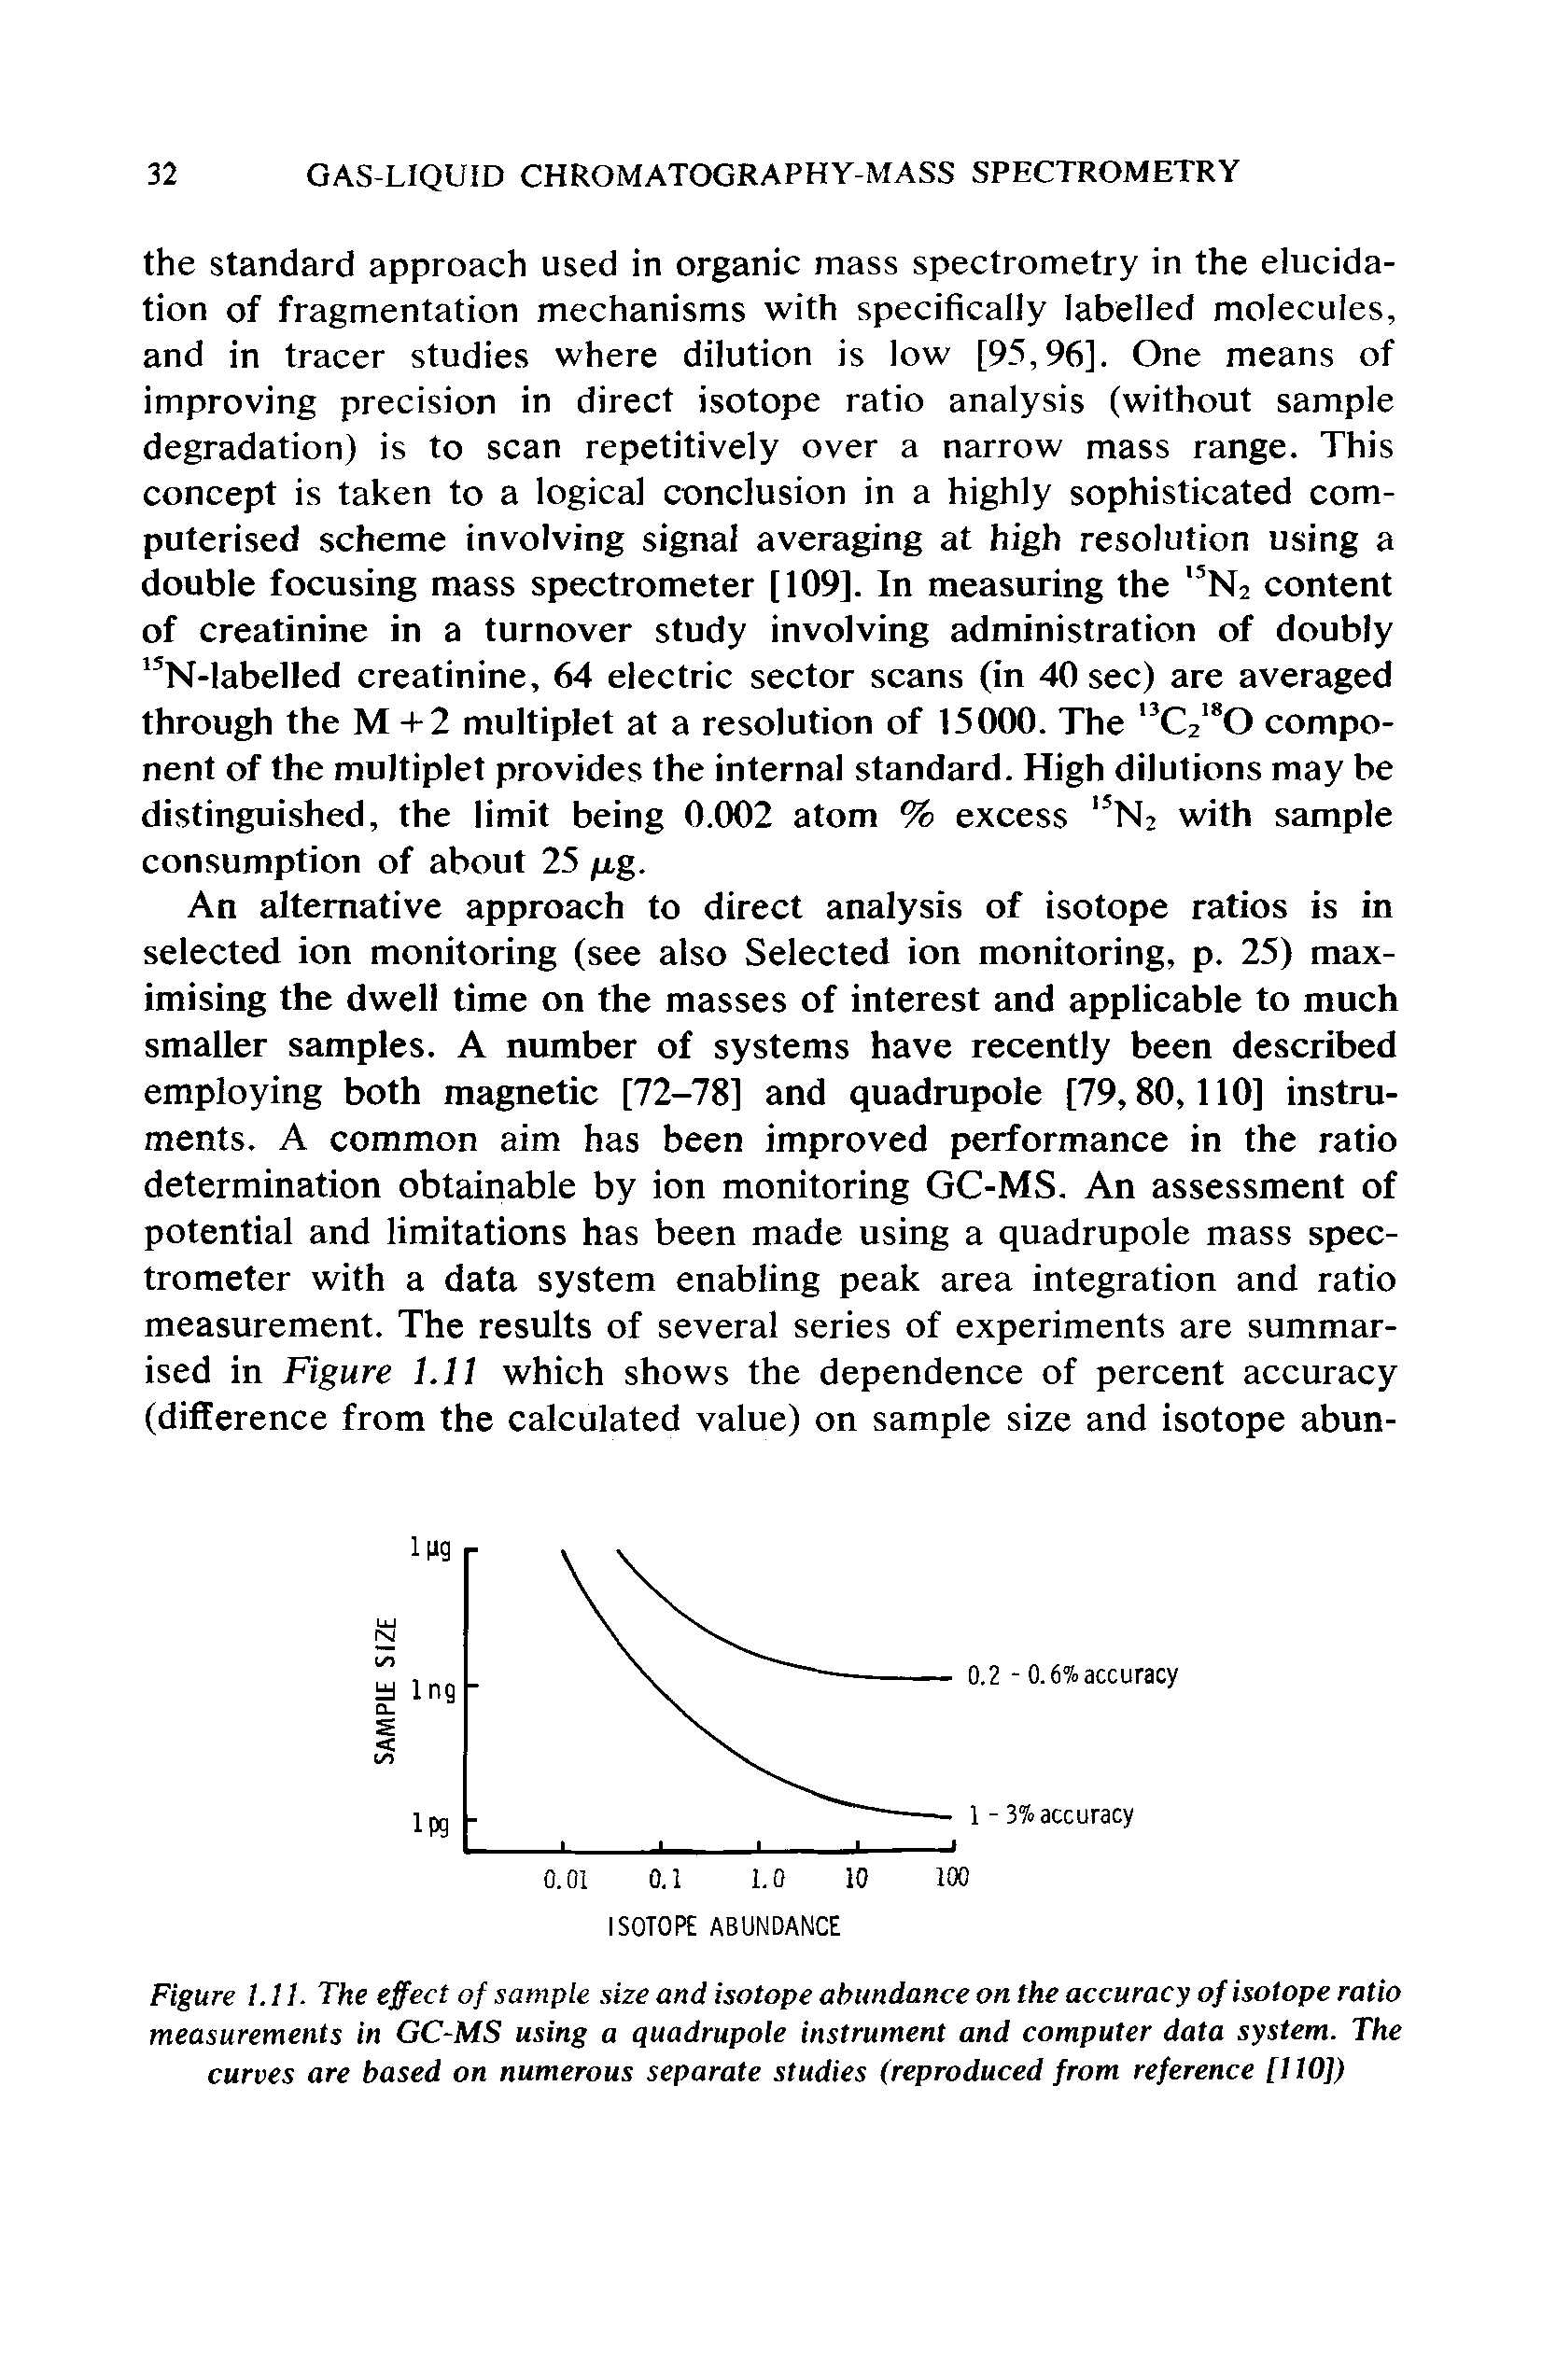 Figure 1.11. The effect of sample size and isotope abundance on the accuracy of isotope ratio measurements in GC-MS using a quadrupole instrument and computer data system. The curves are based on numerous separate studies (reproduced from reference [110])...